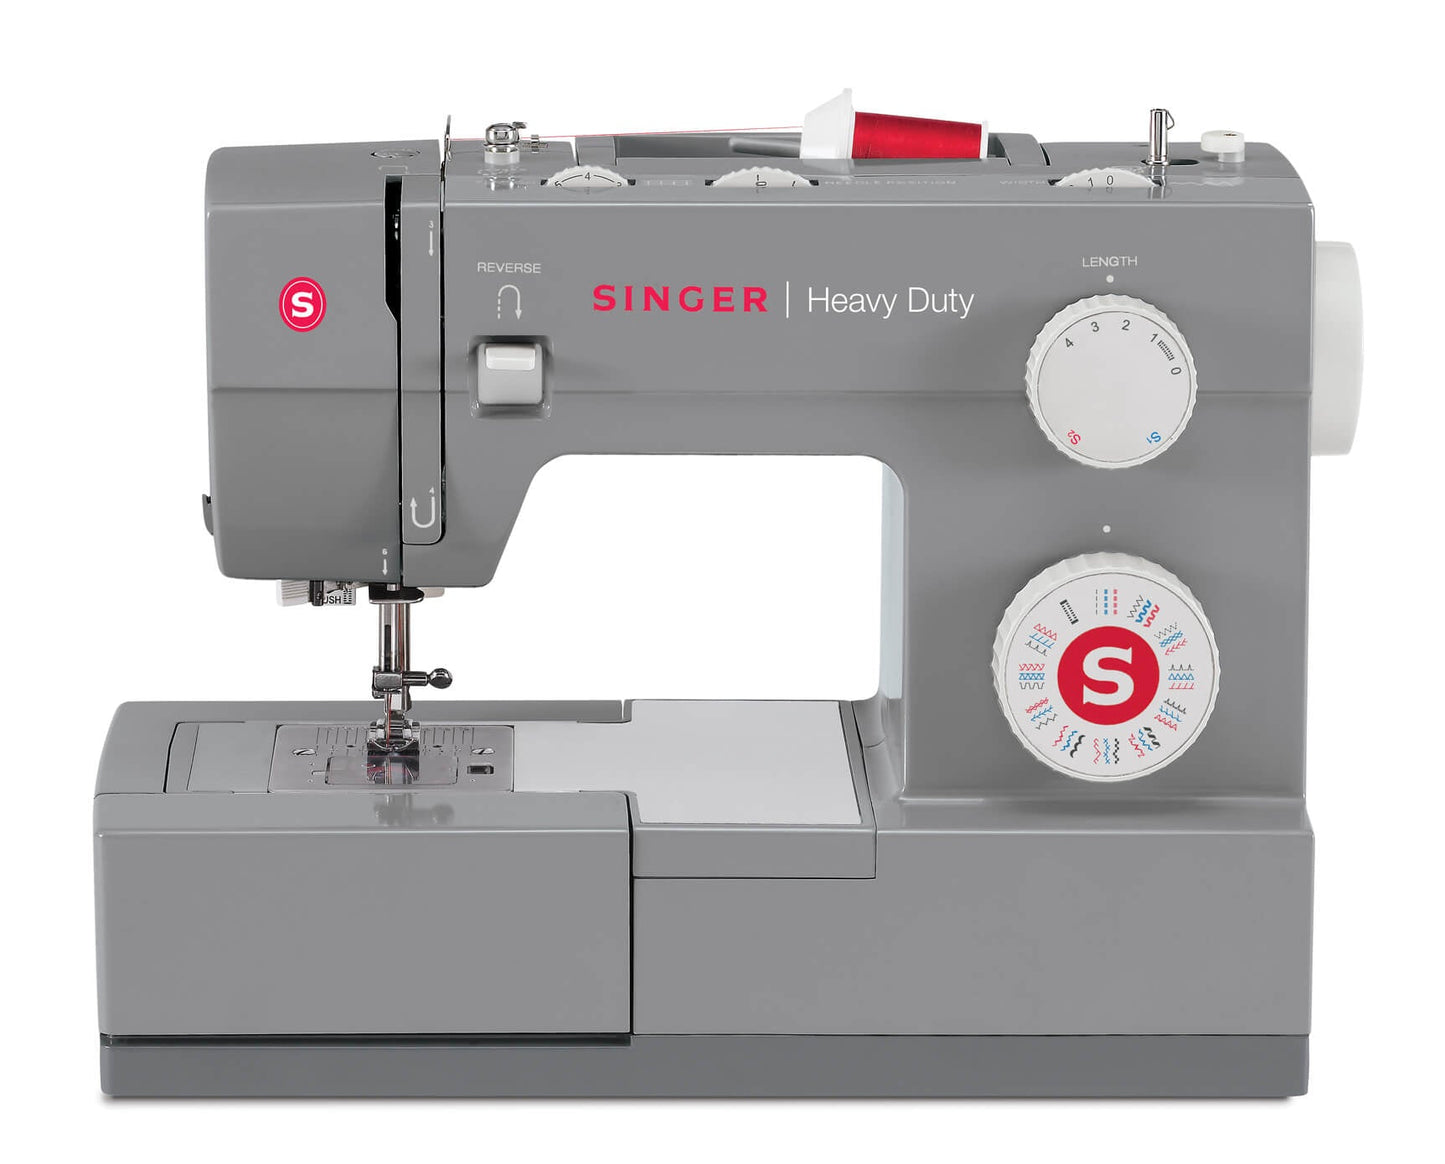 Singer Heavy Duty 4432 XL edition * Sale Offer * with Extension table and Straight Stitch foot - Latest 2024 model * Free upgrade to include Denim Accessory Kit *